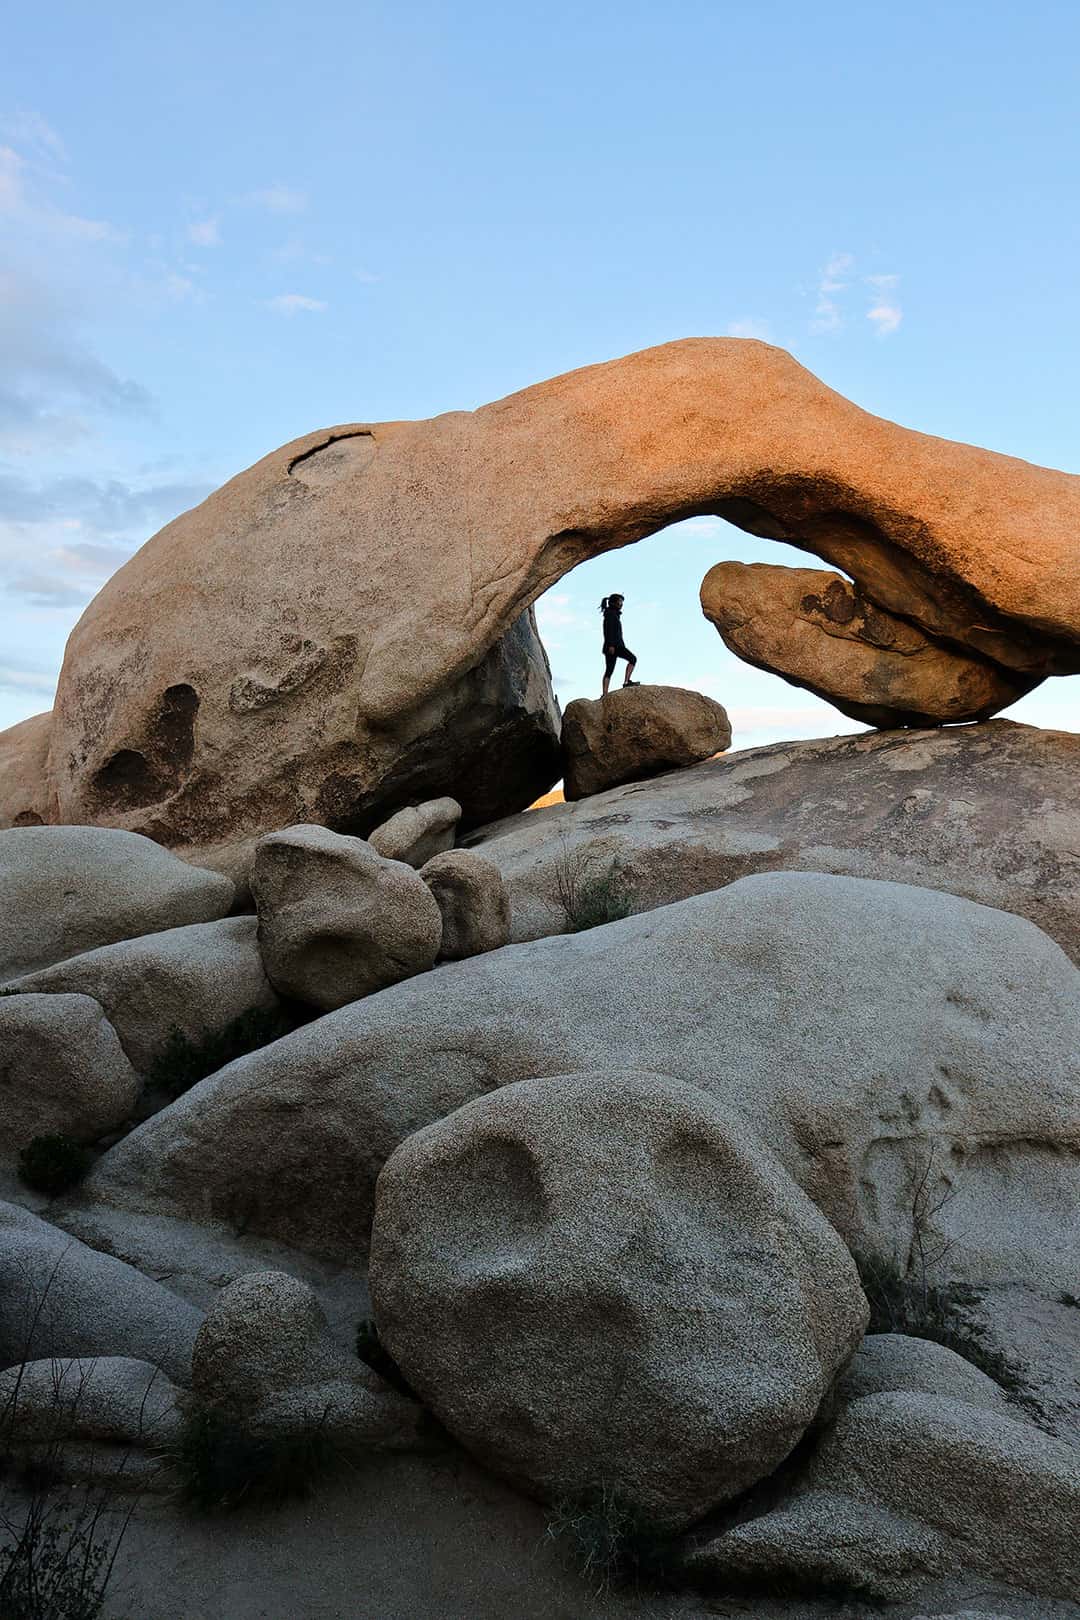 Arch Rock Nature Trail in Joshua Tree National Park